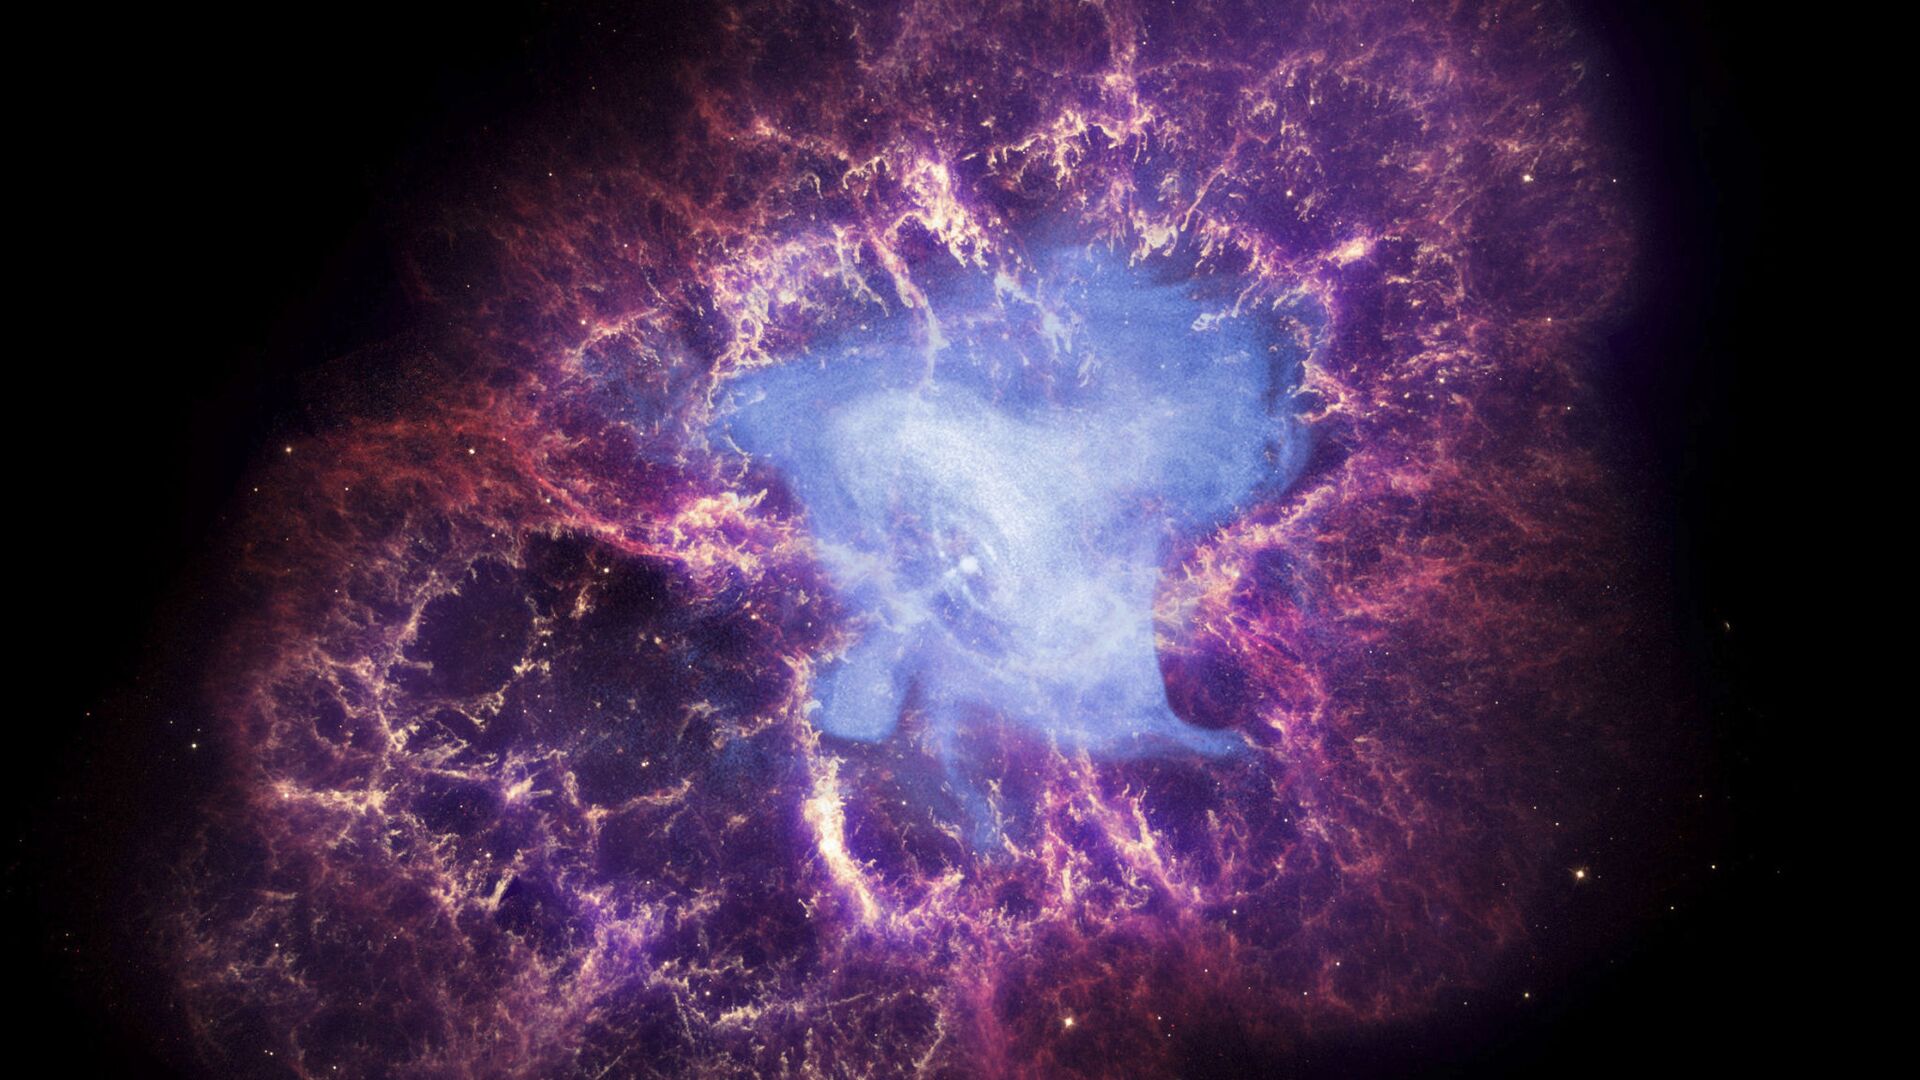 This composite image made available by NASA shows a neutron star, center, left behind by the explosion from the original star's death in the constellation Taurus, observed on Earth as the supernova of A.D. 1054. This image uses data from three of NASA's observatories: the Chandra X-ray image is shown in blue, the Hubble Space Telescope optical image is in red and yellow, and the Spitzer Space Telescope's infrared image is in purple. After nearly two decades in Earth orbit, scanning the universe with infrared eyes, ground controllers plan to put the faltering Spitzer Space Telescope into permanent hibernation on Thursday, Jan. 29, 2020 - Sputnik International, 1920, 03.01.2022